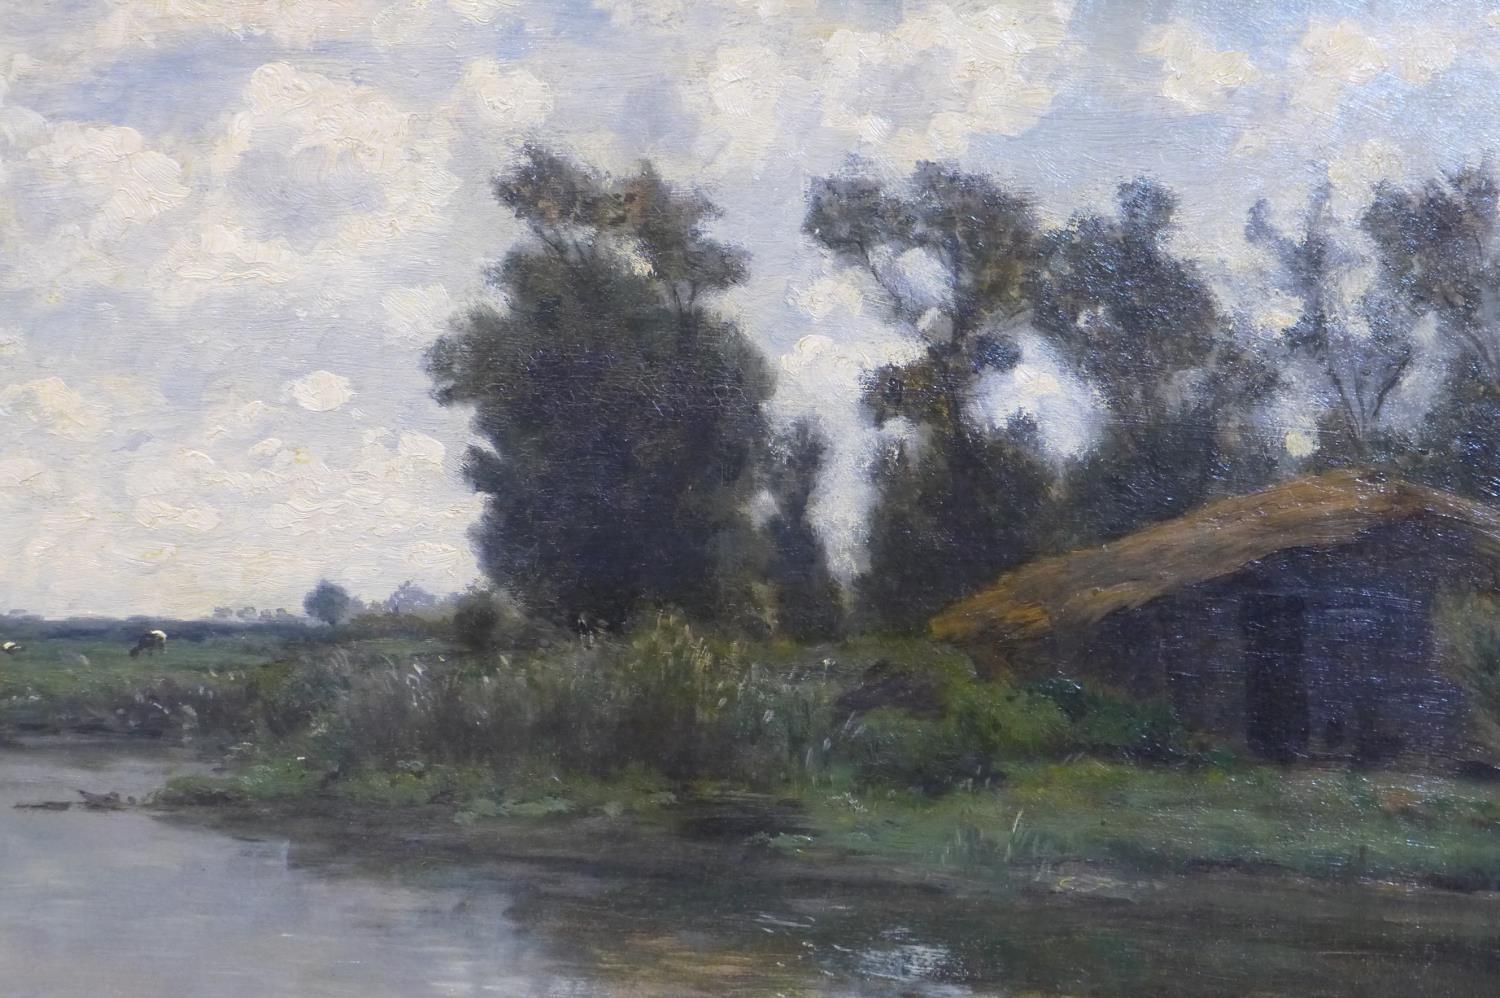 Attributed to Willem Roelofs (1822-1897), Cows grazing by a river in Dutch countryside, oil on